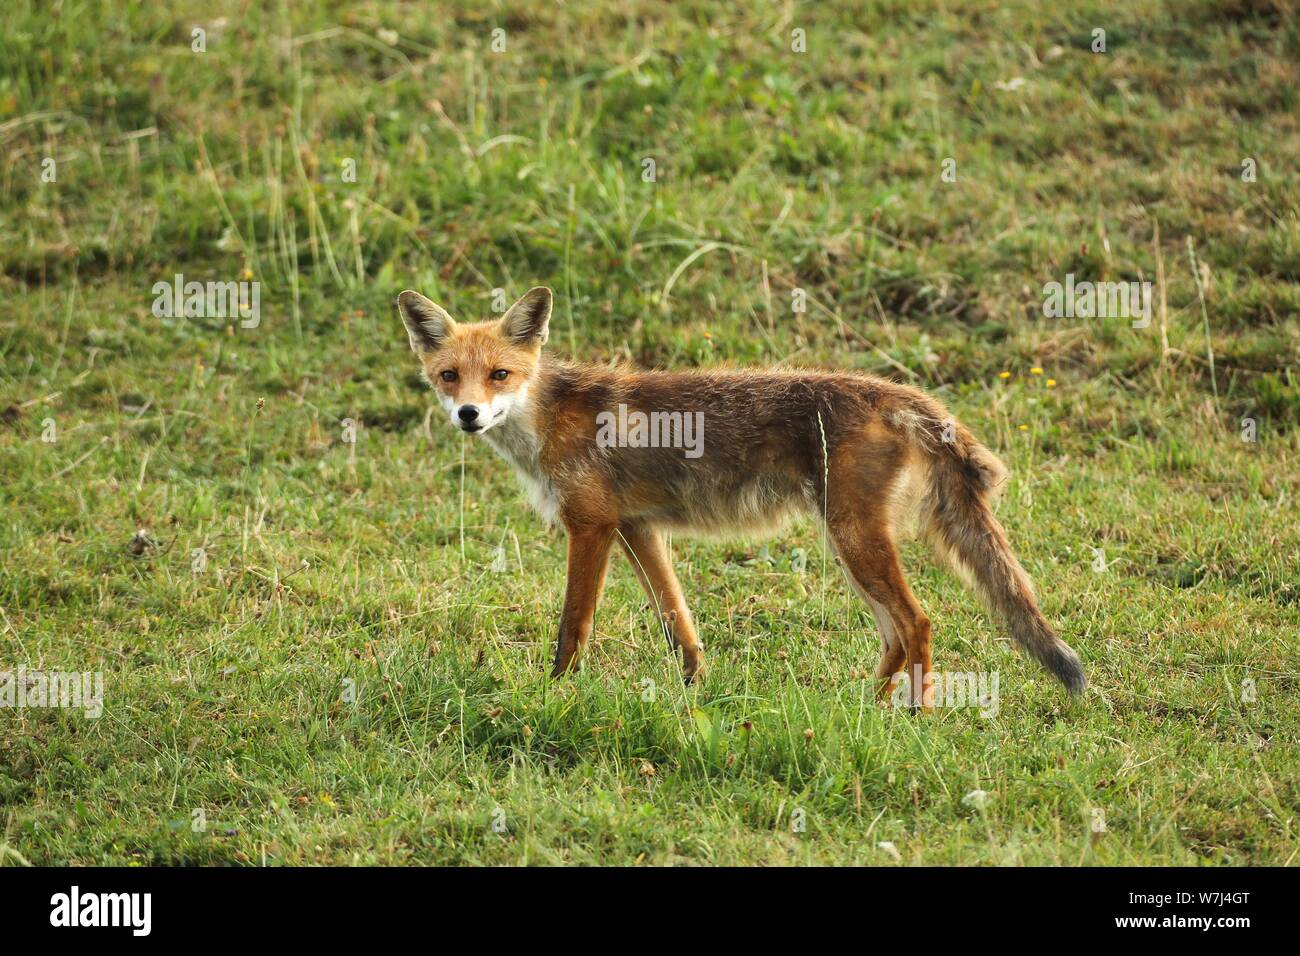 Red fox (Vulpes vulpes) Start of mange, infested by itch mites (Sarcoptes scabiei), Allgau, Bavaria, Germany Stock Photo